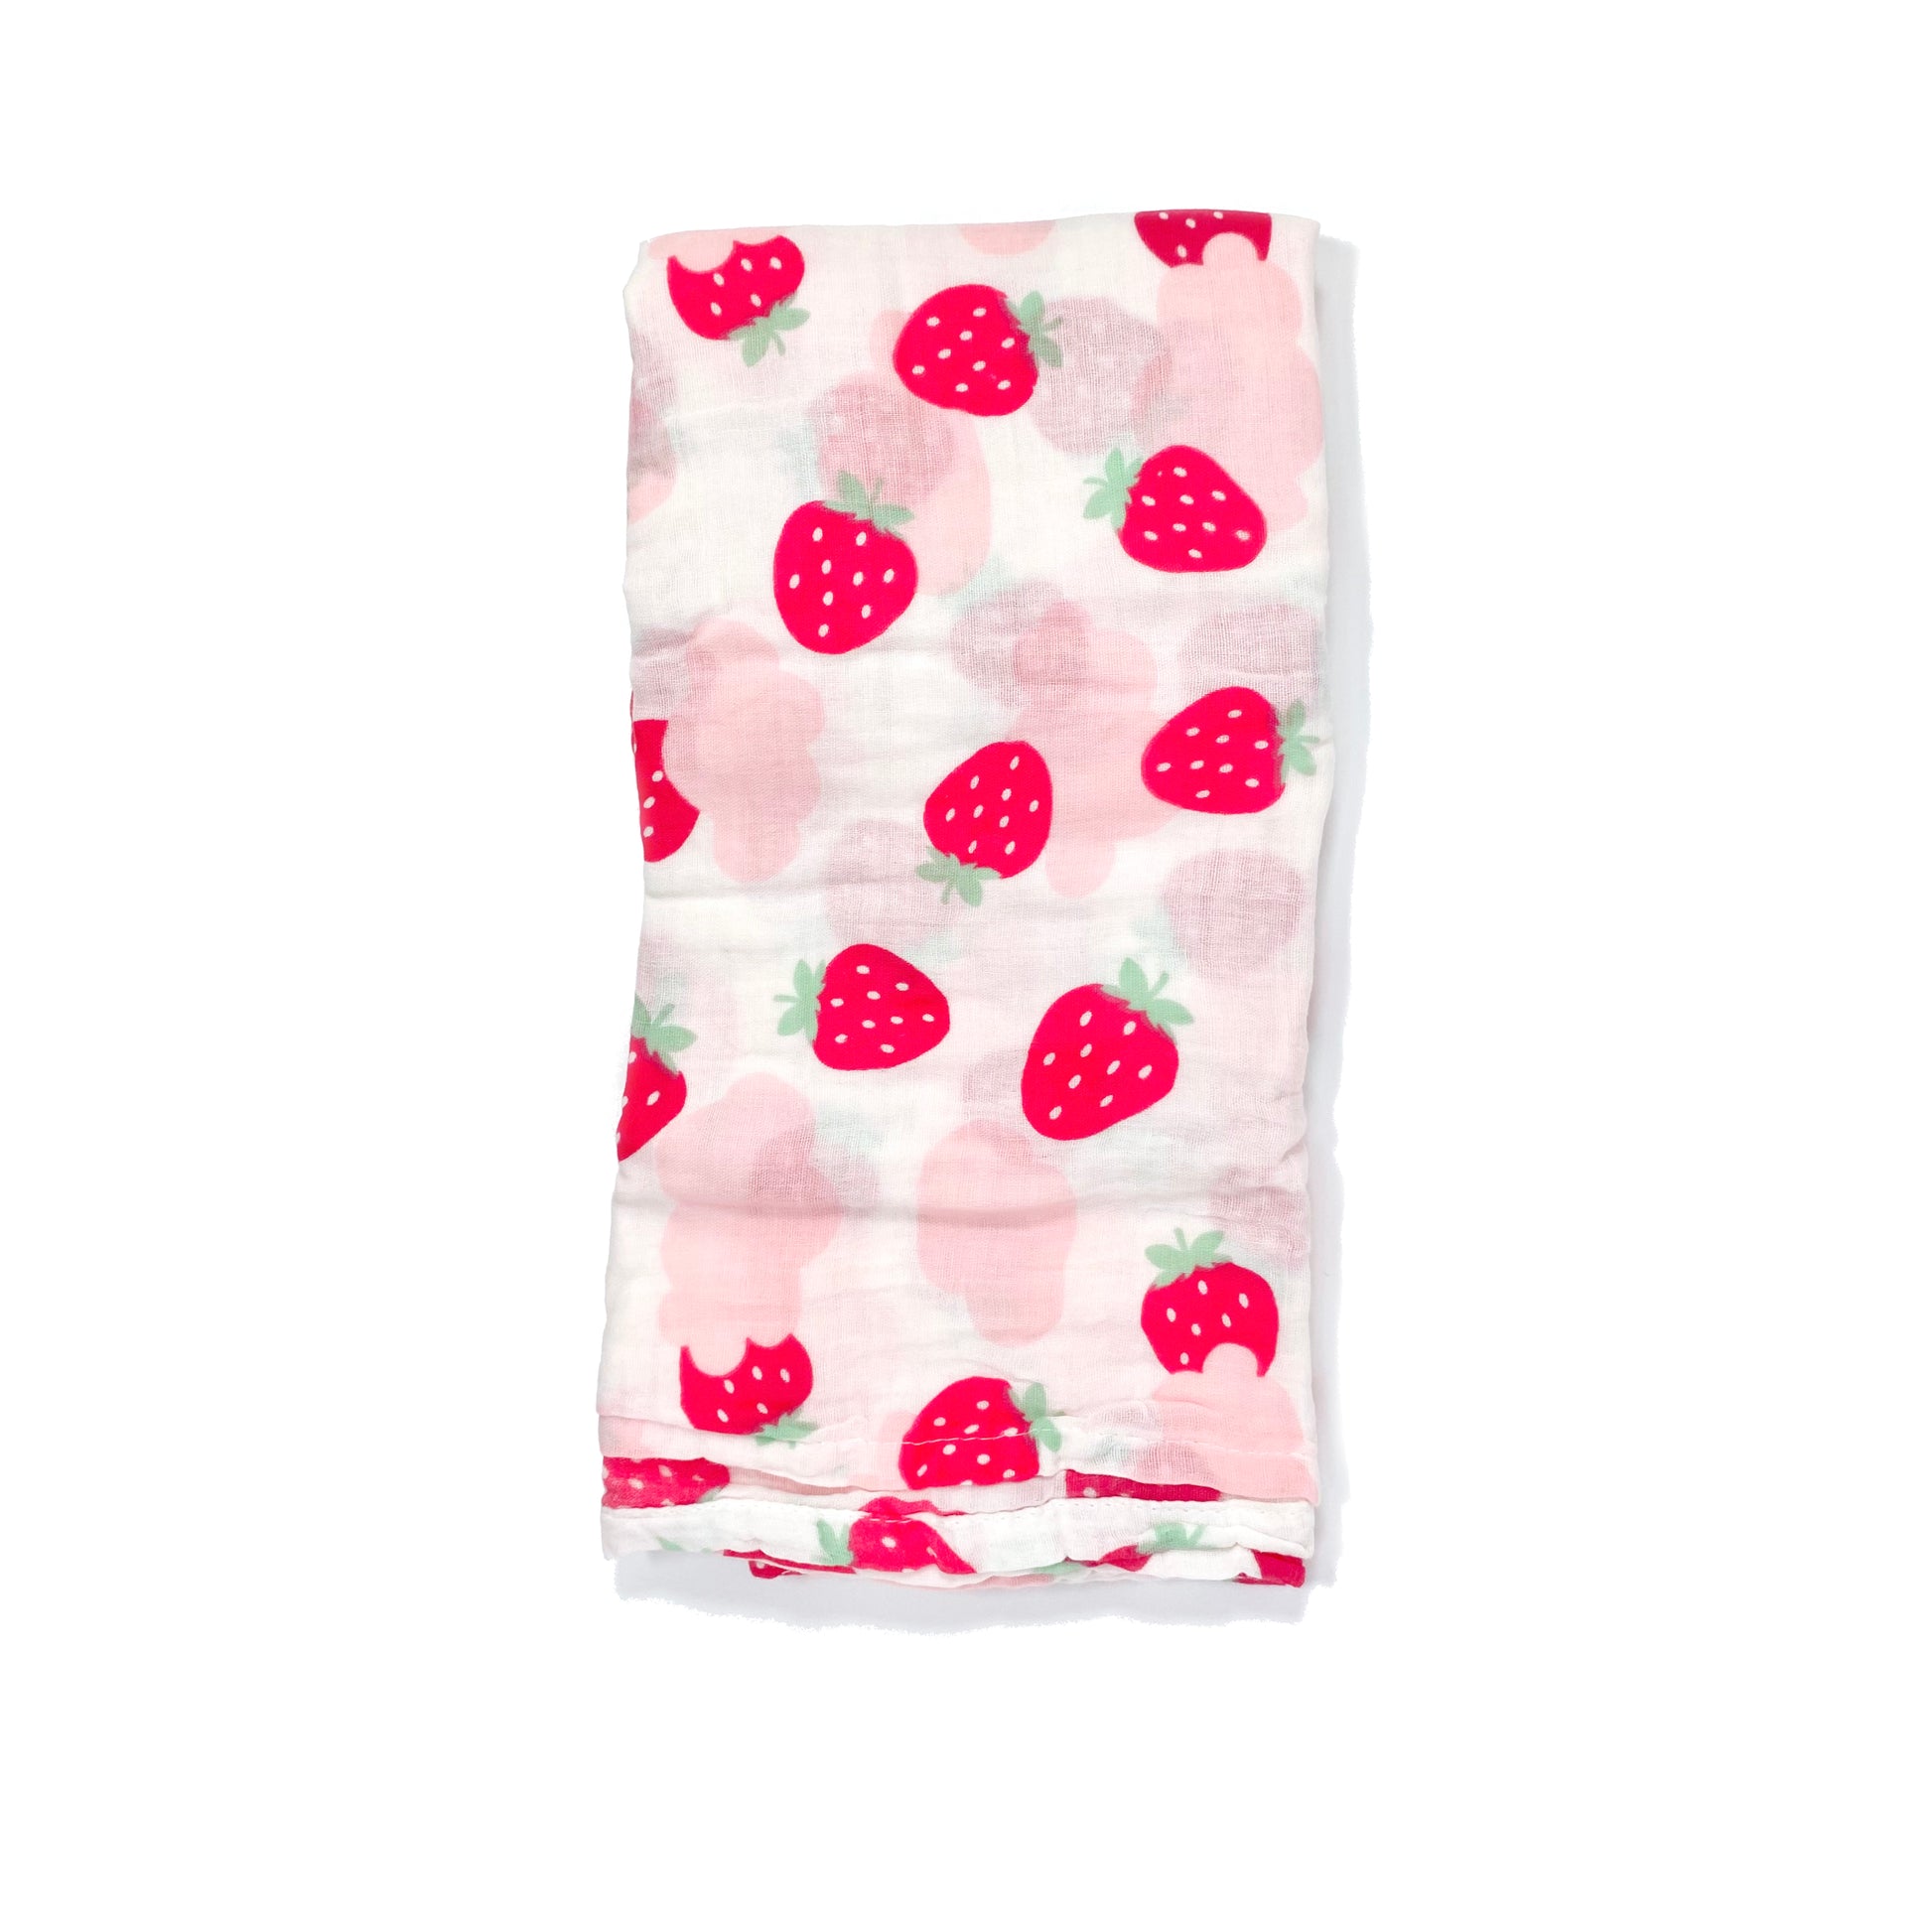 A muslin baby swaddle blanket made from bamboo and cotton fibres, in a pink strawberry design. 